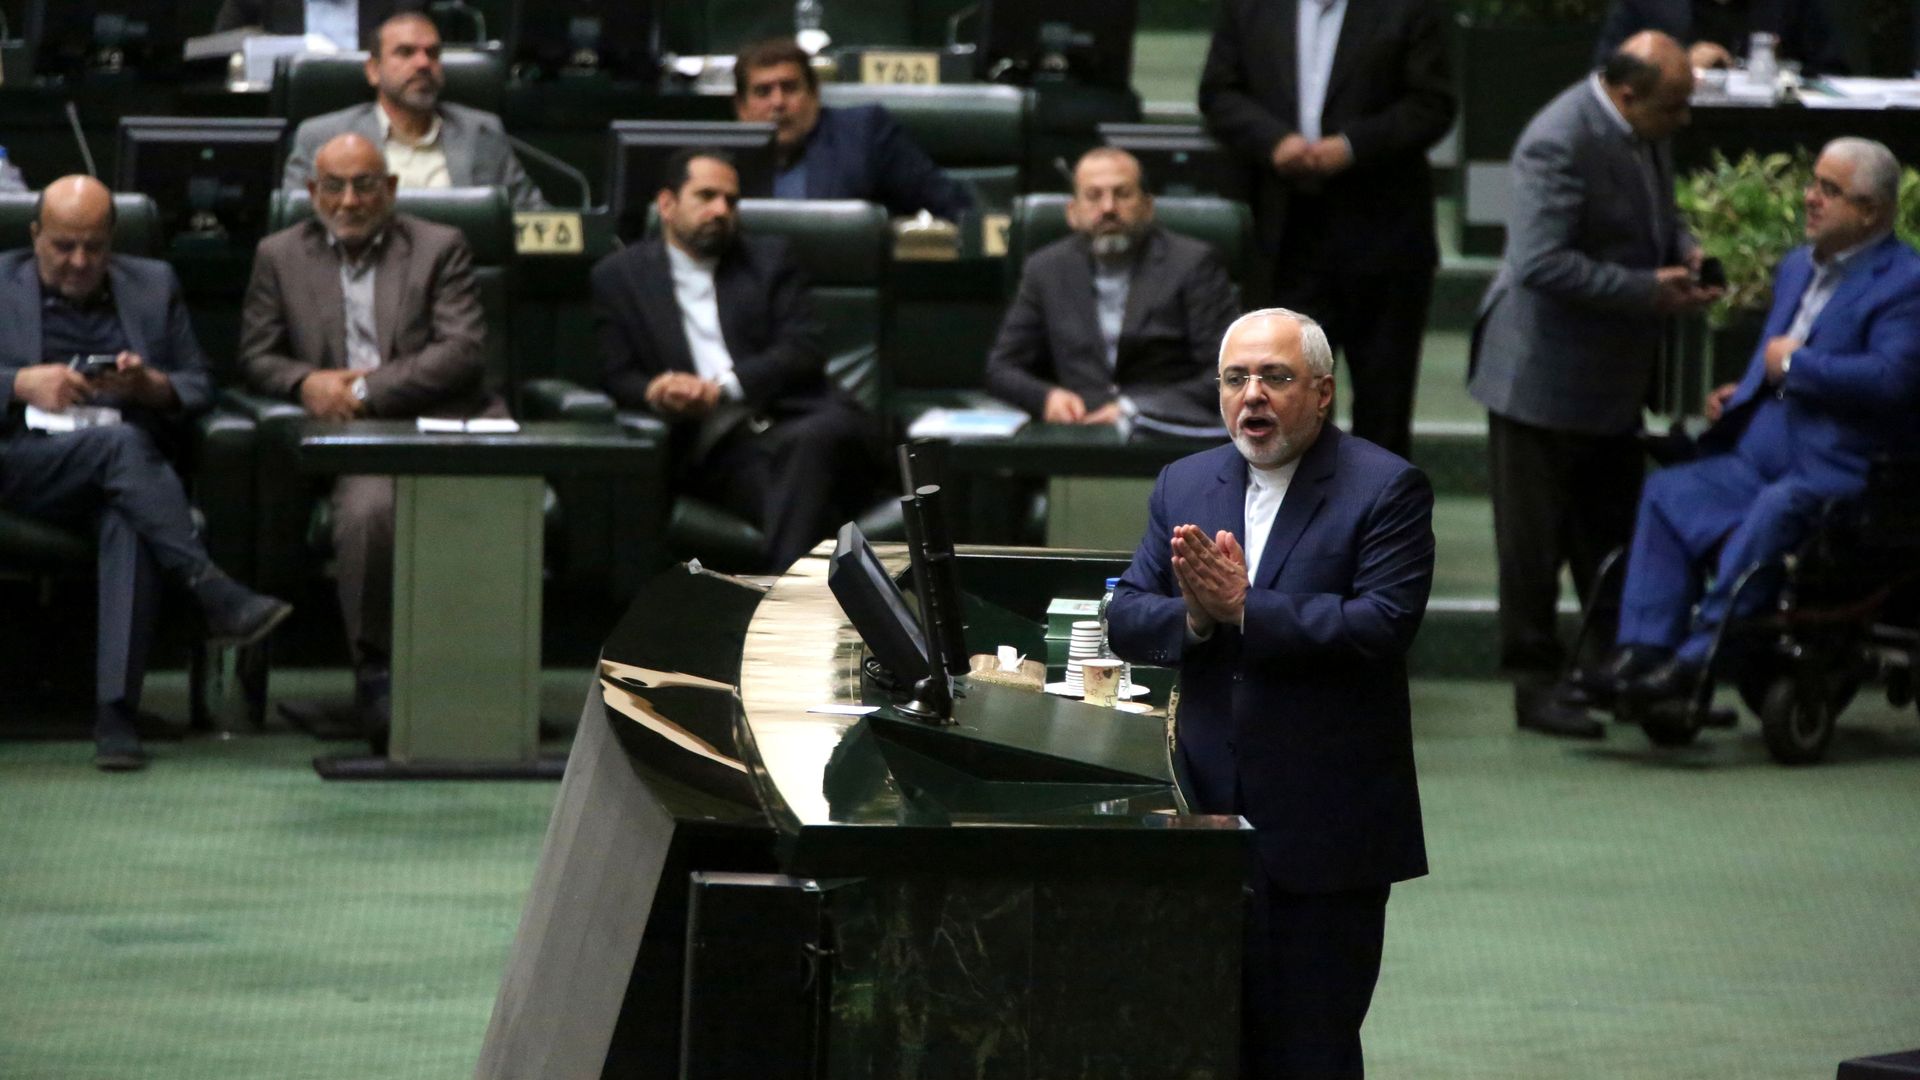  Iran's Foreign Minister Mohammad Javad Zarif delivers a speech to the parliament in Tehran on October 7, 2018, over the a bill to counter terrorist financing.